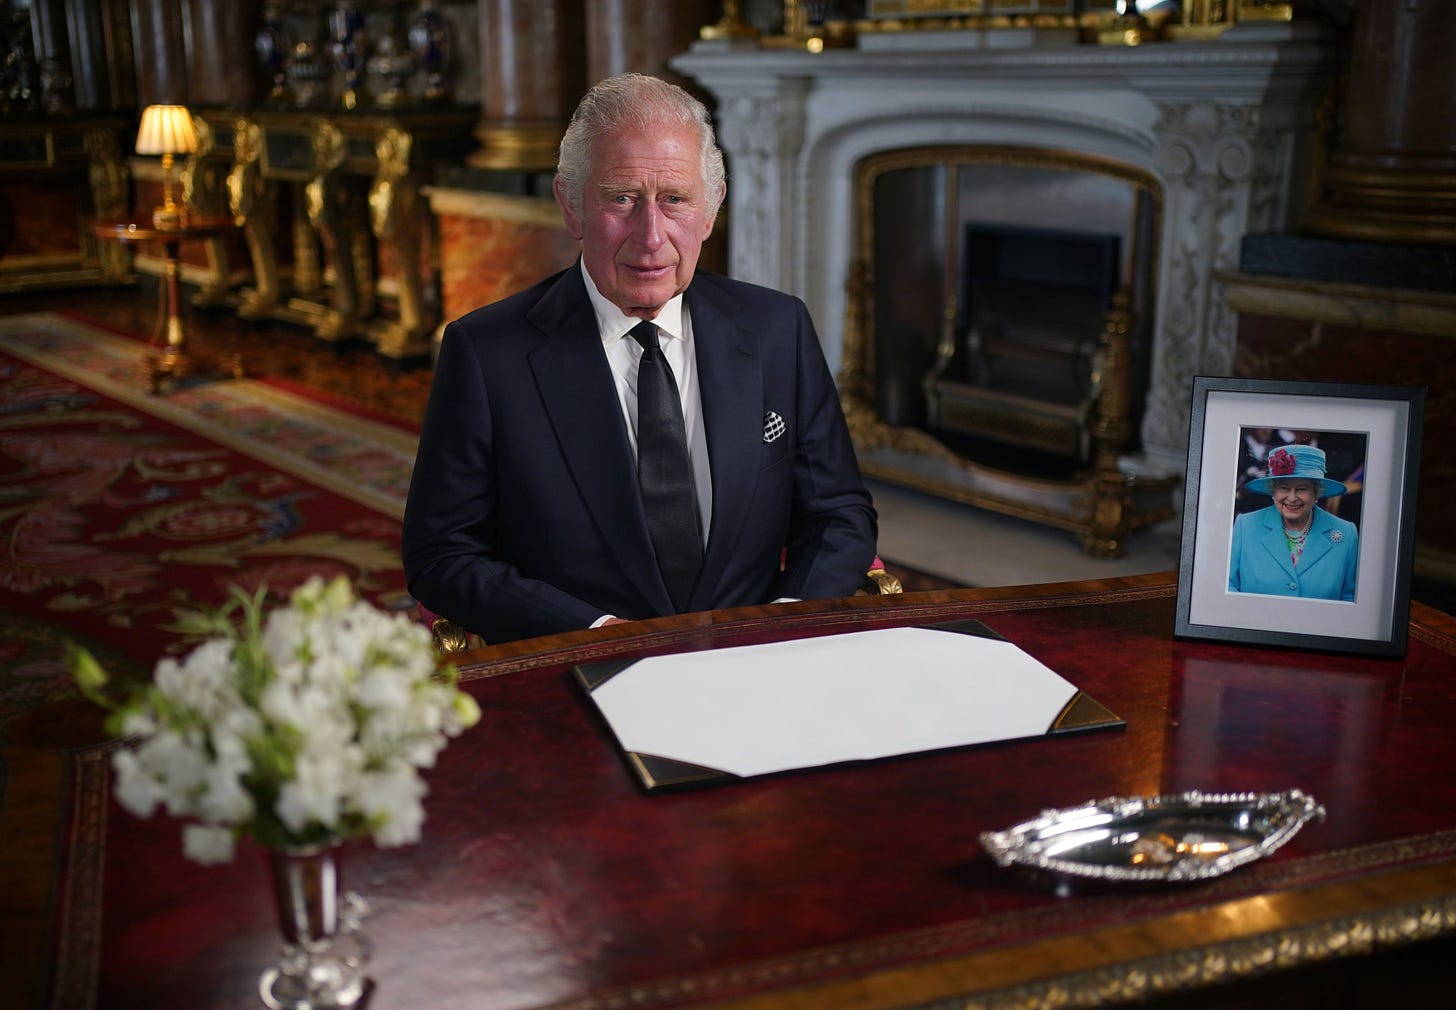 In First Speech King Charles III Defined How He Sees the Role of King